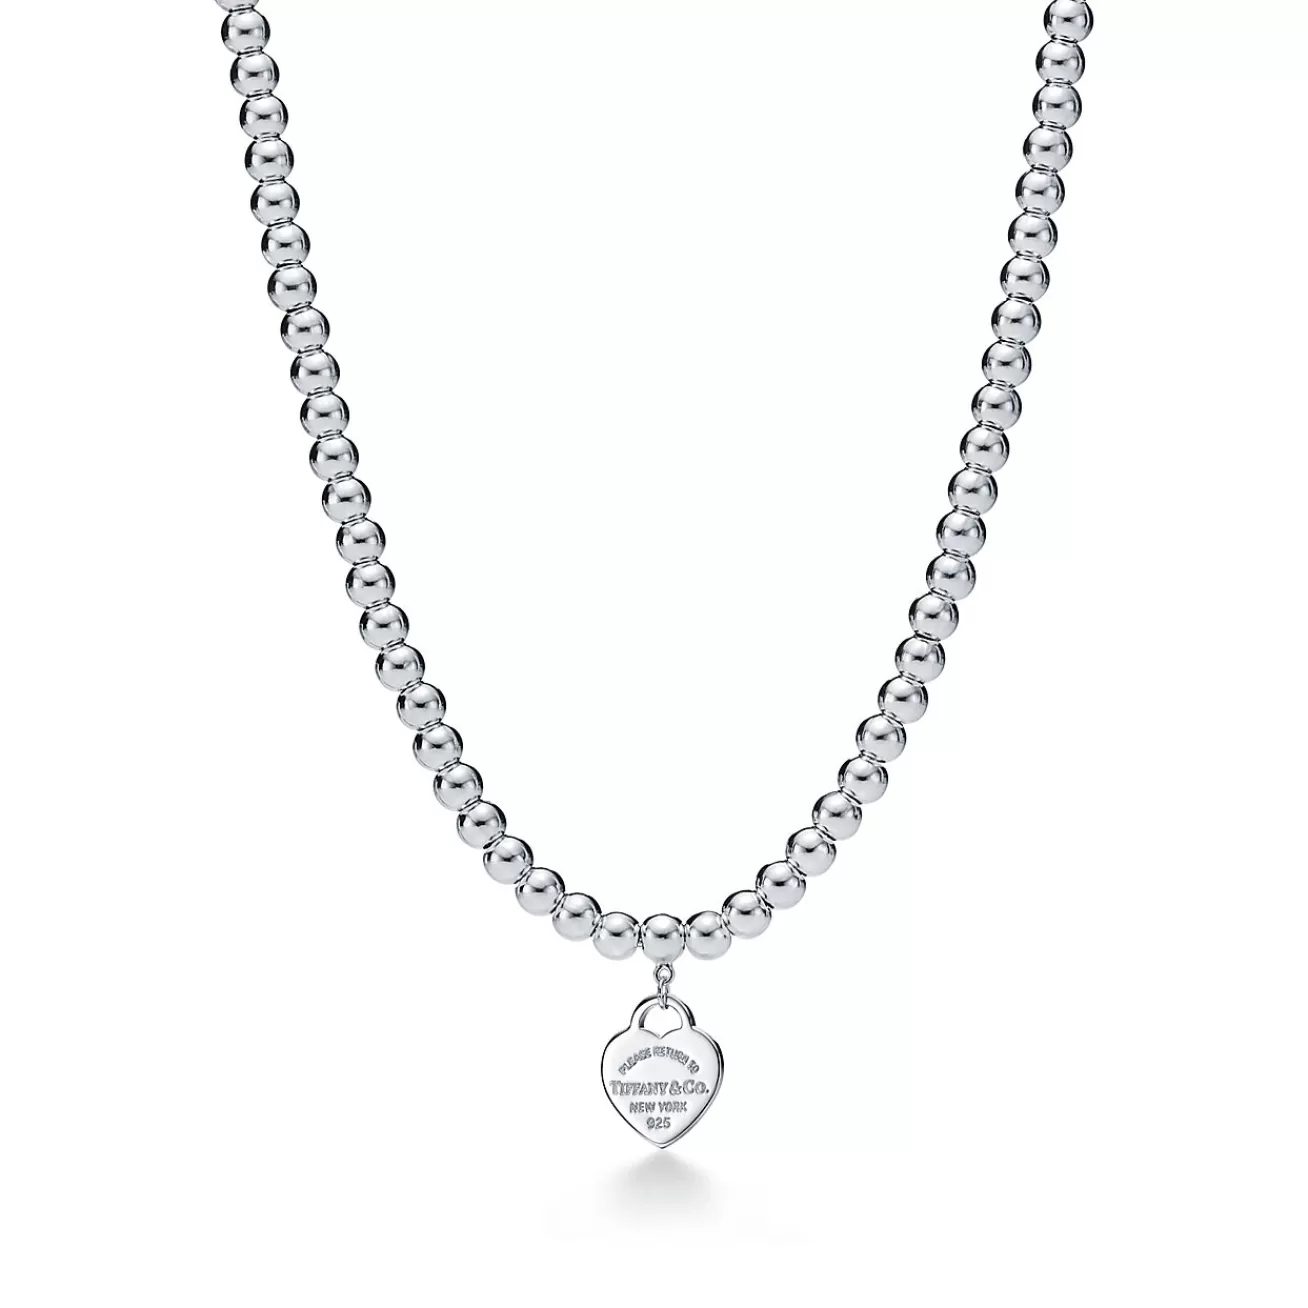 Tiffany & Co. Return to Tiffany® heart tag necklace in sterling silver with enamel finish. | ^ Necklaces & Pendants | Sterling Silver Jewelry